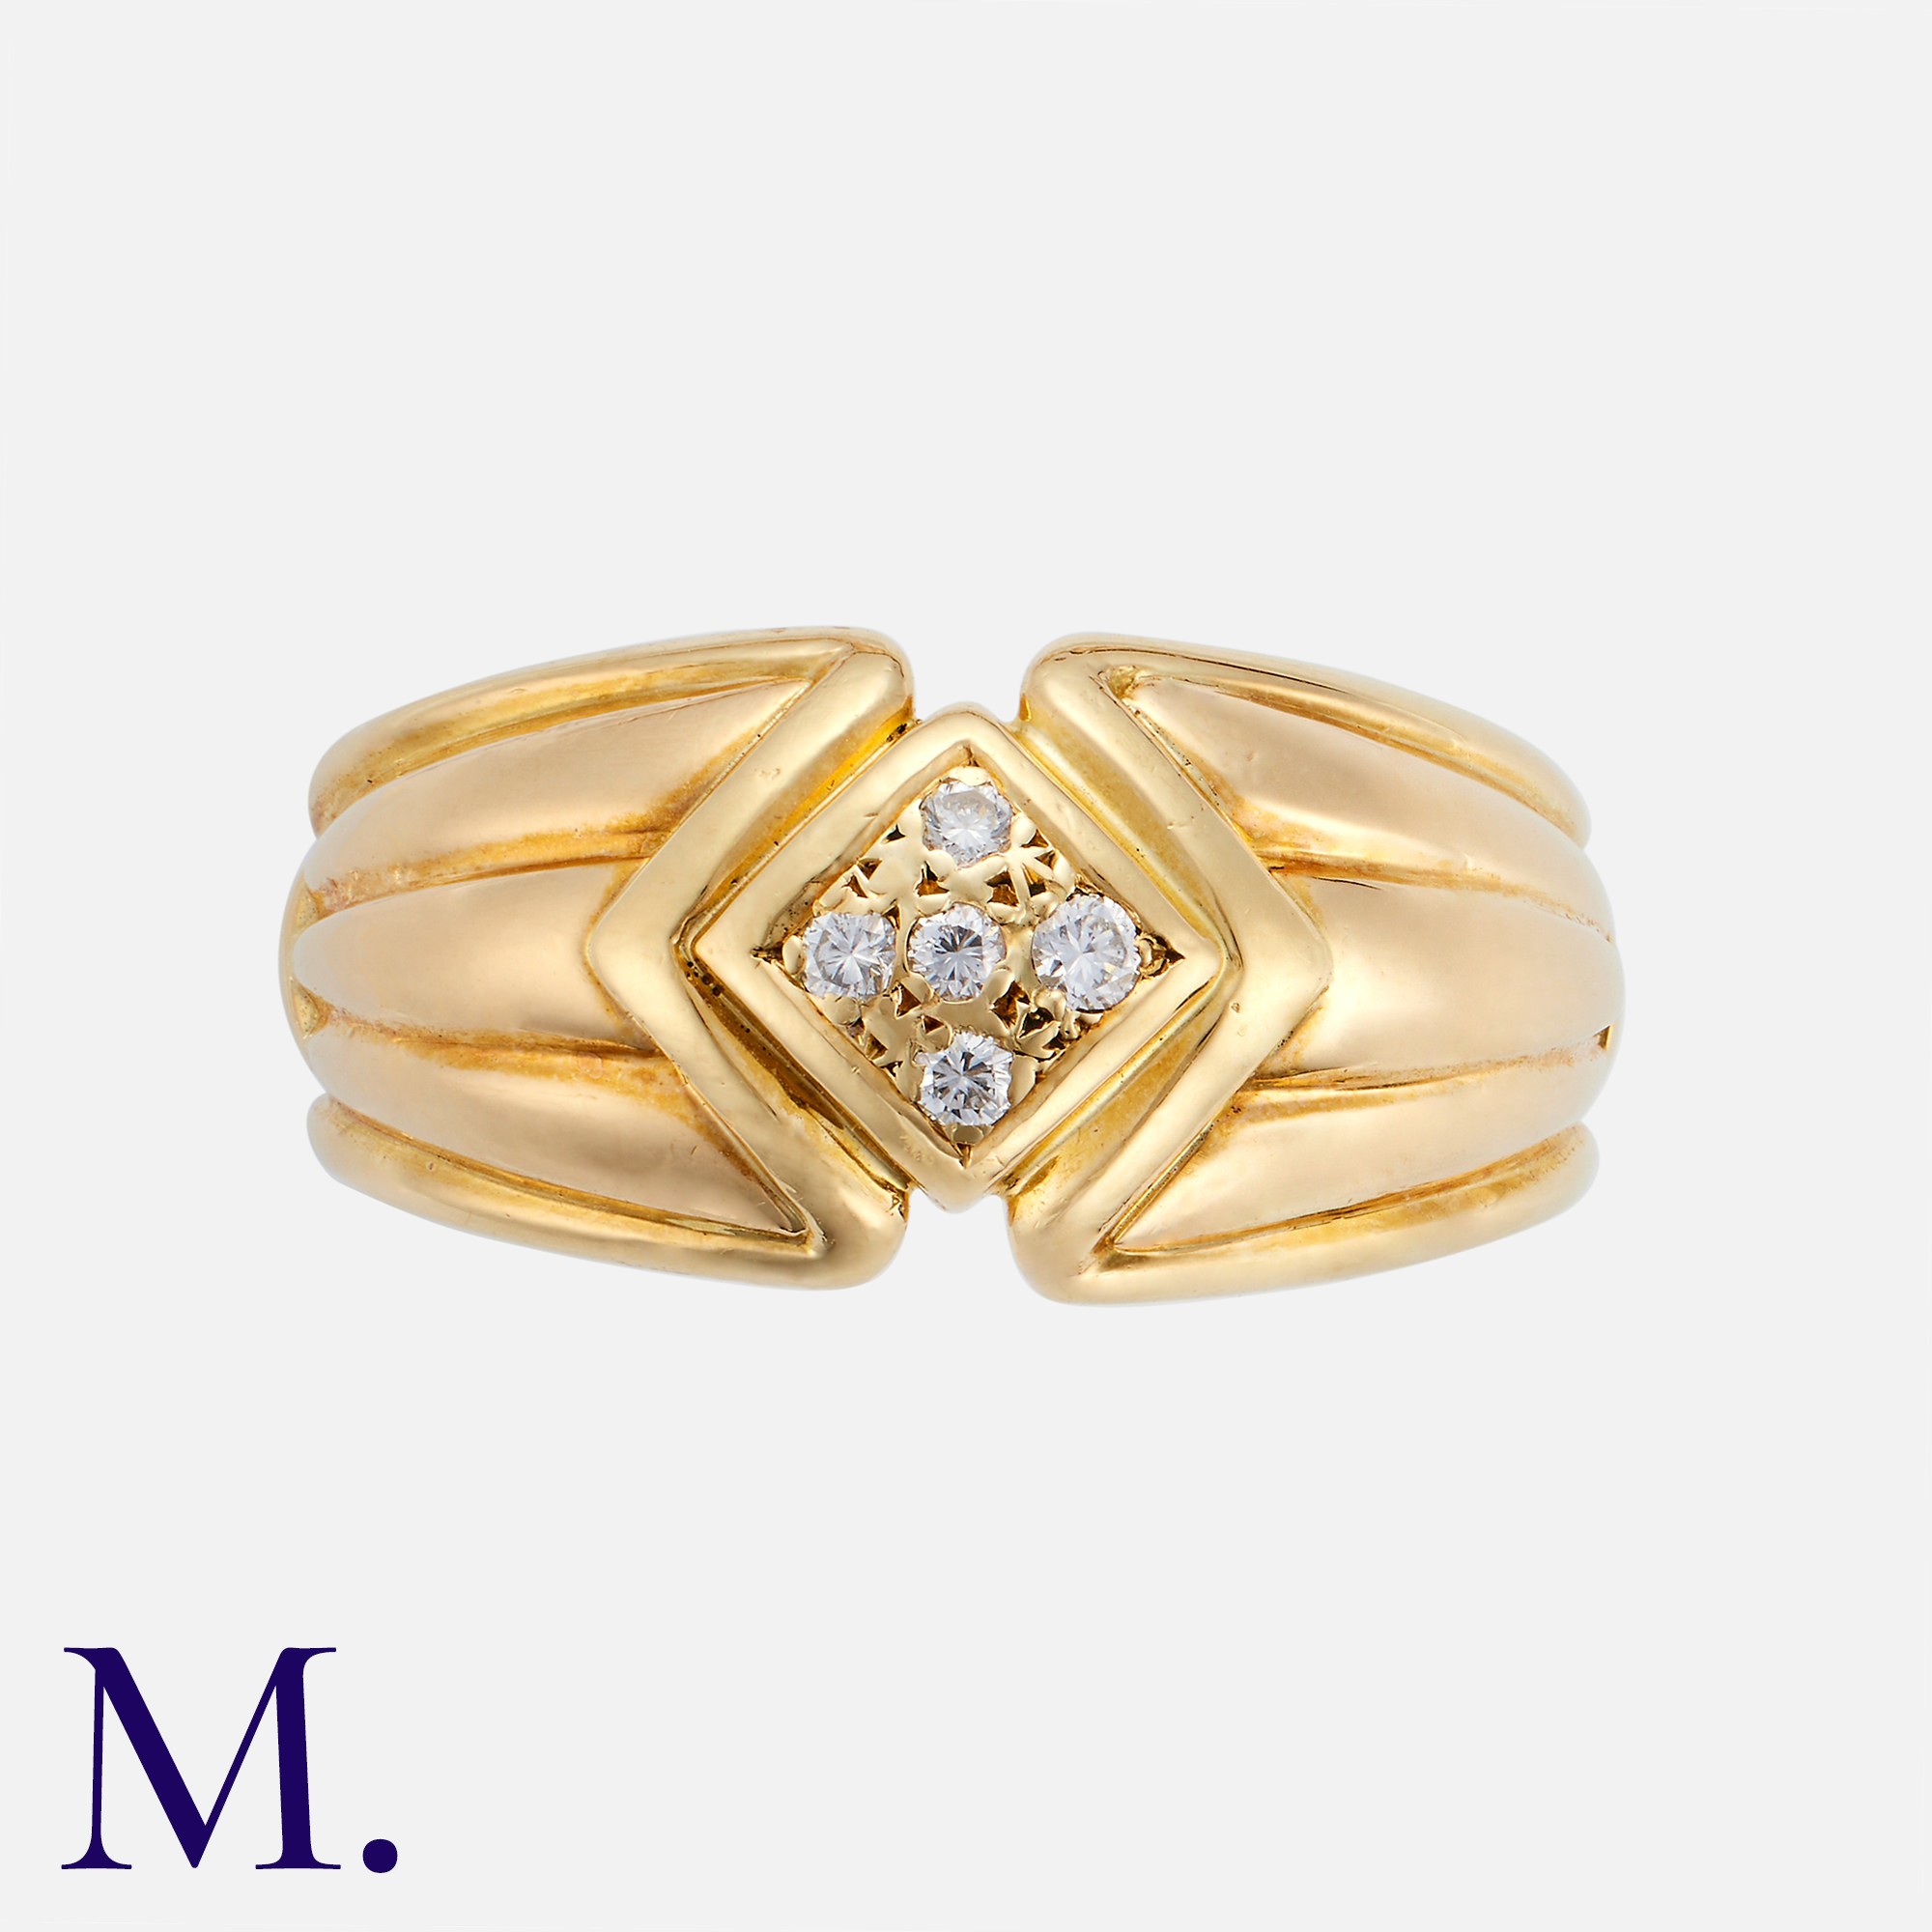 BOUCHERON. A Diamond Ring in 18K yellow gold, set with five round cut diamonds weighing